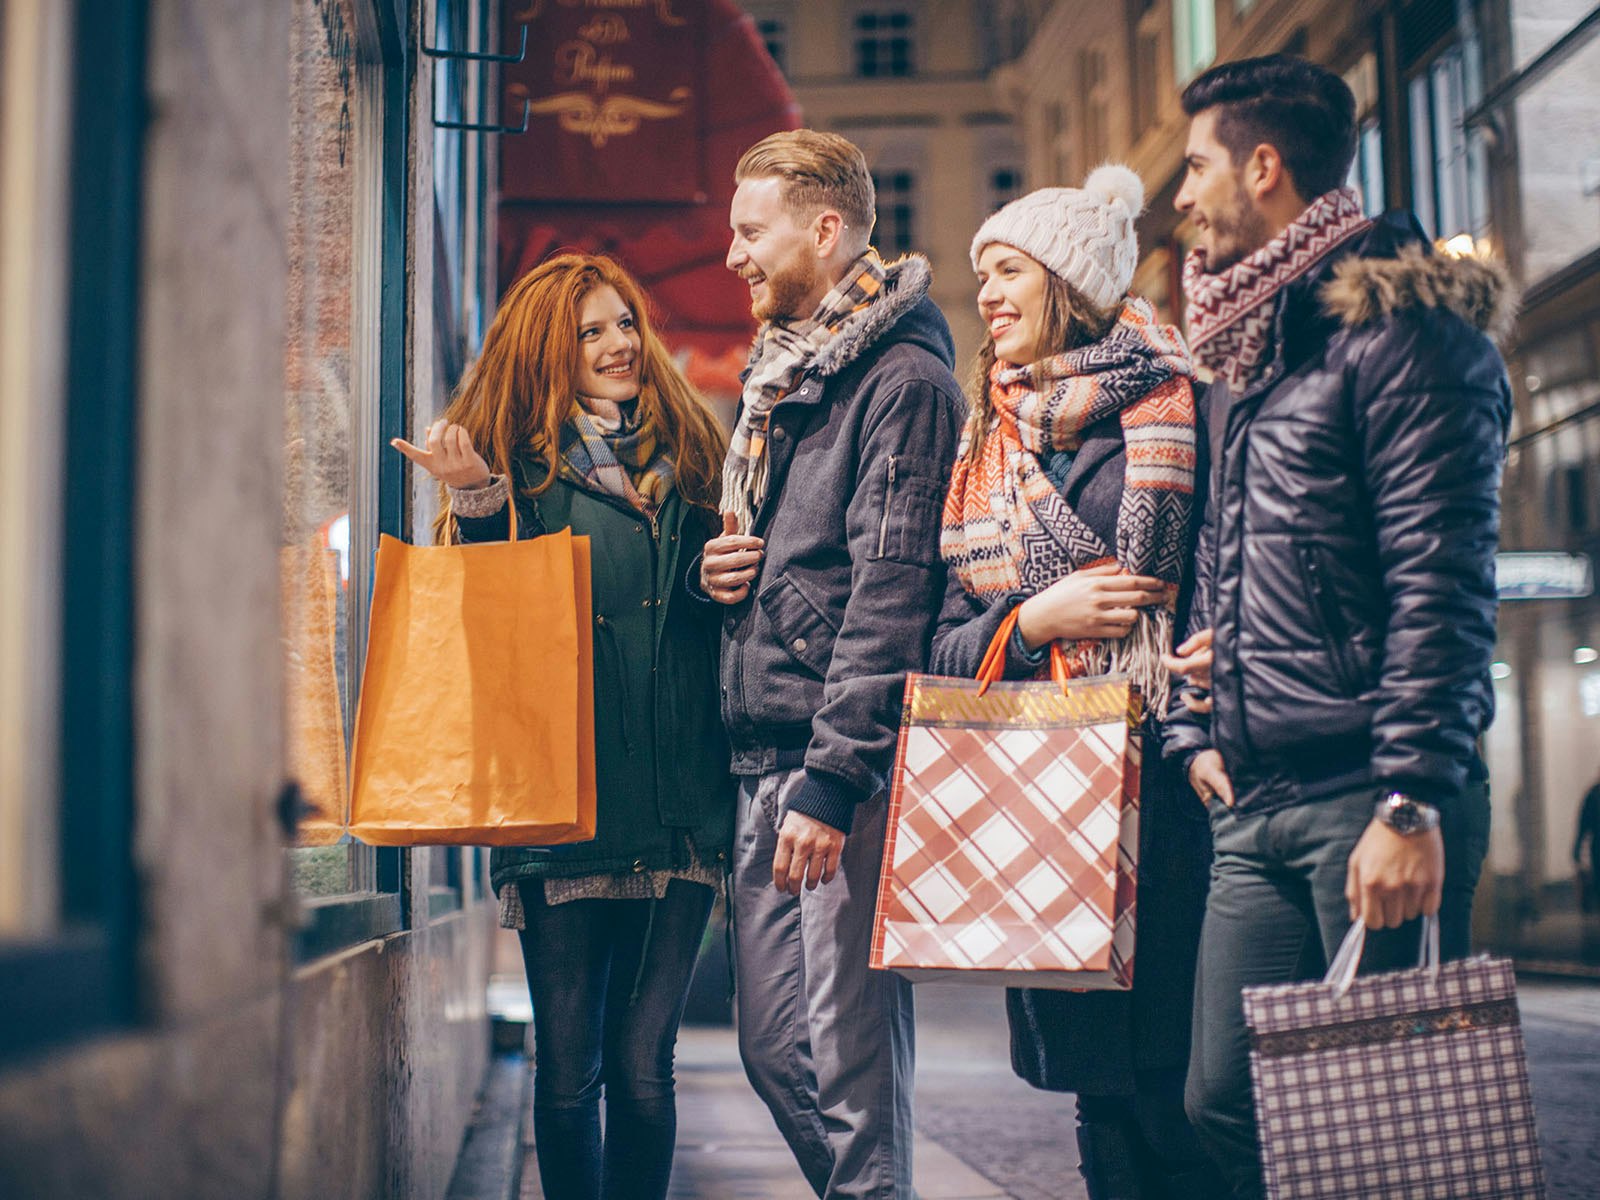 Winter holiday shopping in the city with friends